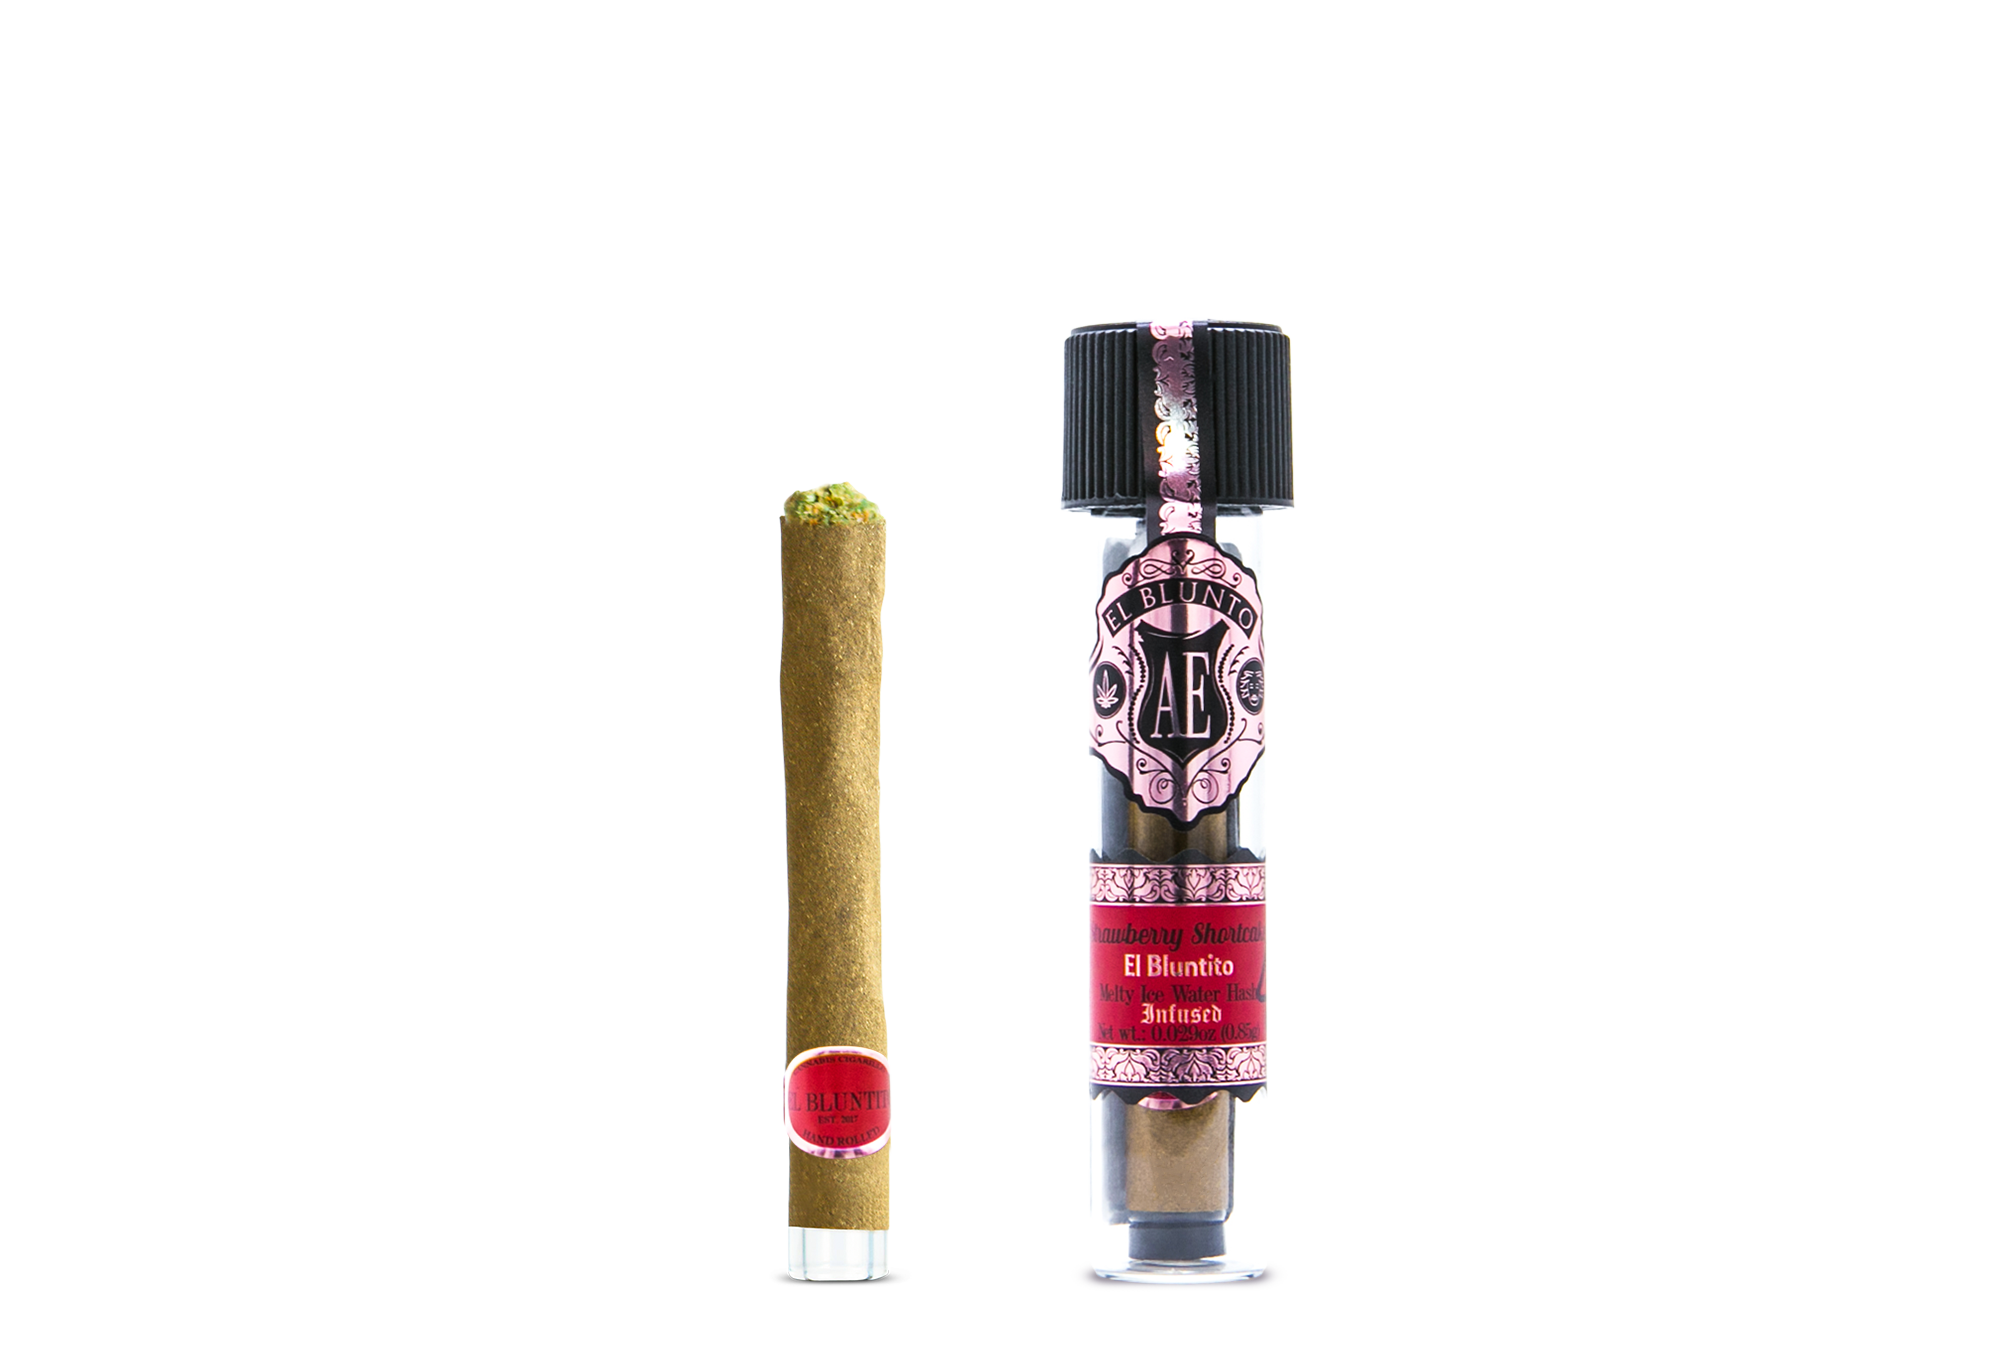 A photograph of AE ROSE GOLD El Bluntito Hash Infused Indica Strawberry Shortcake .85g